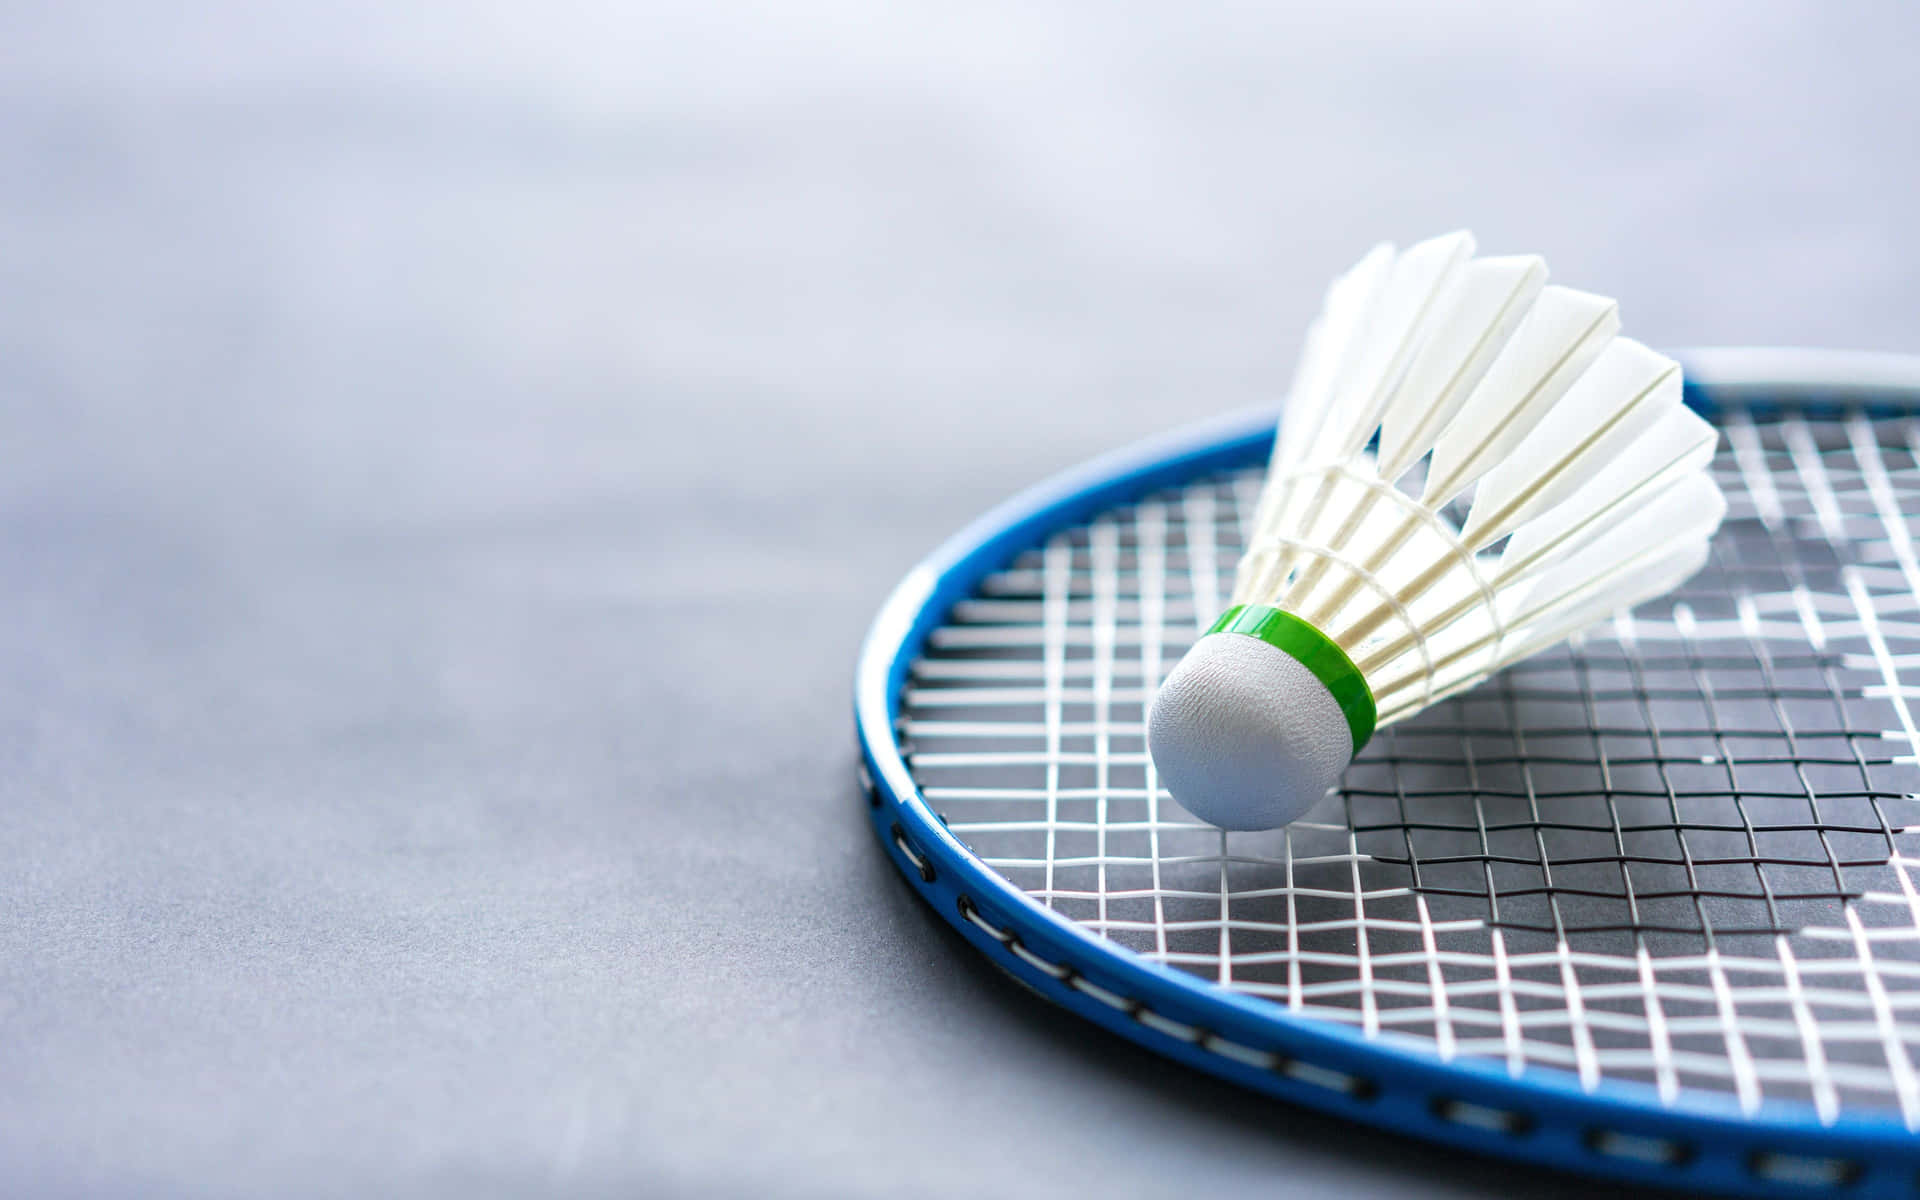 Get Ready to Smash Your Way to Victory on the Badminton Court